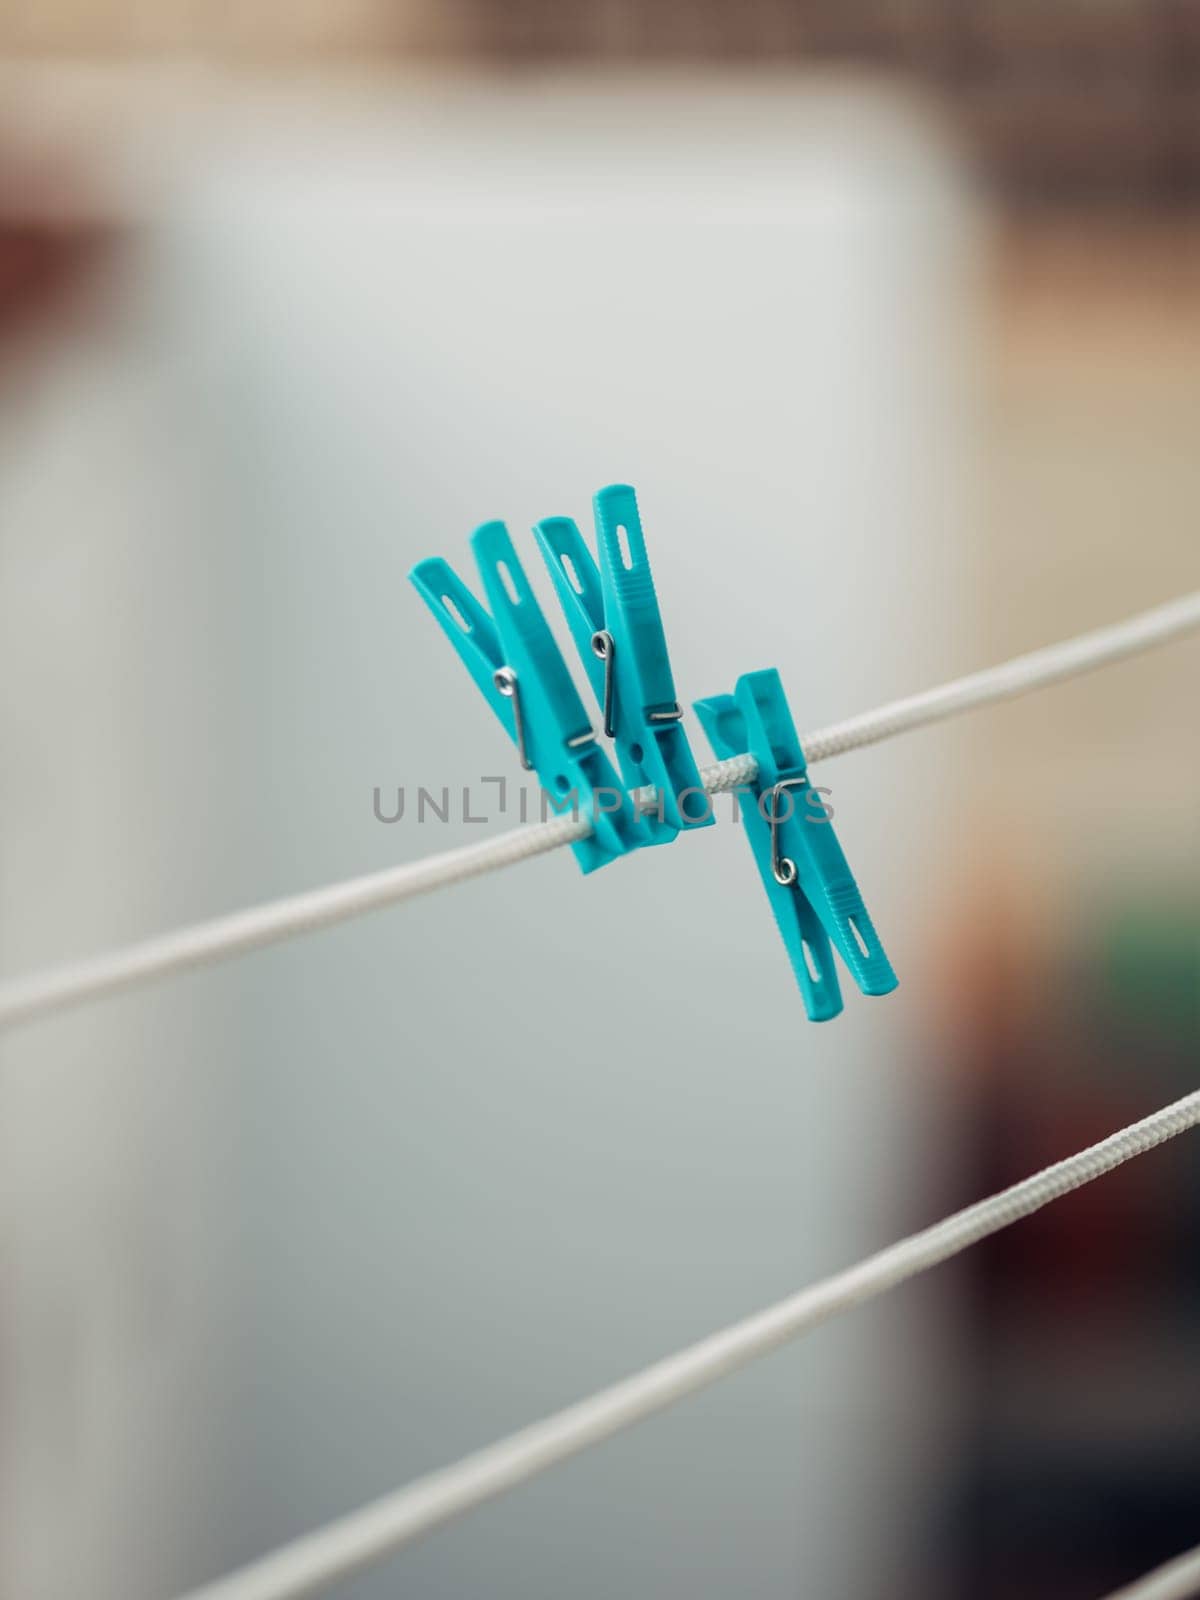 Teal Clothespins on a White Line by apavlin